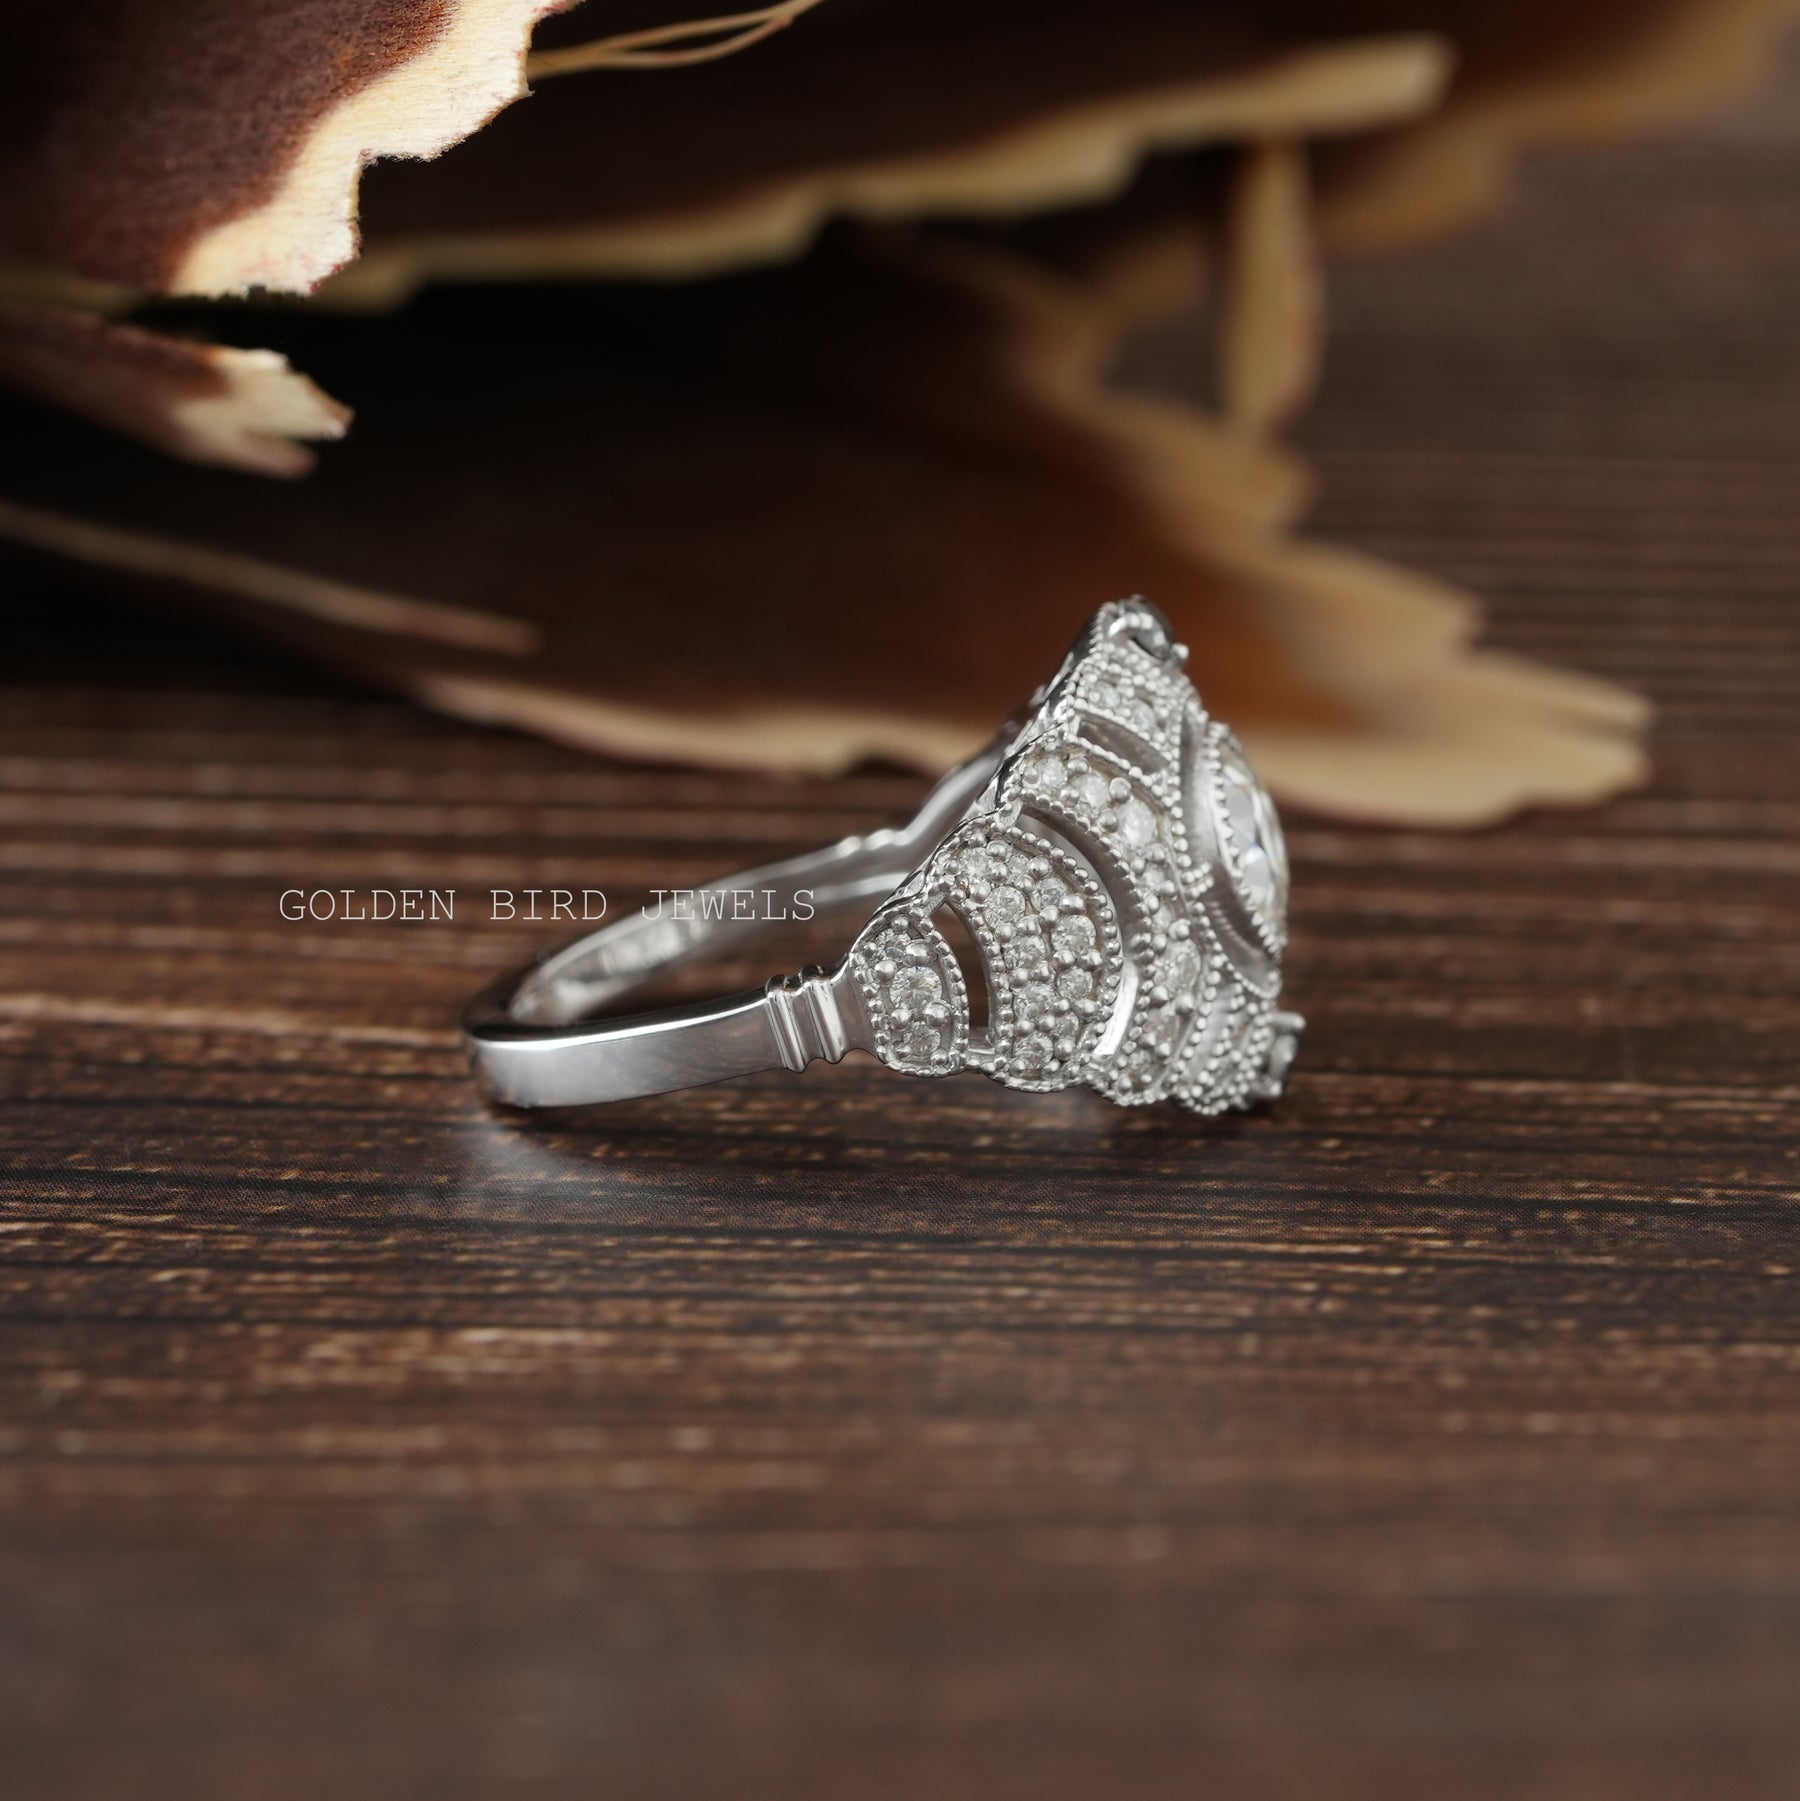 [This bridal moissanite bridal ring made in 18k white gold with VVS clarity moissanite]